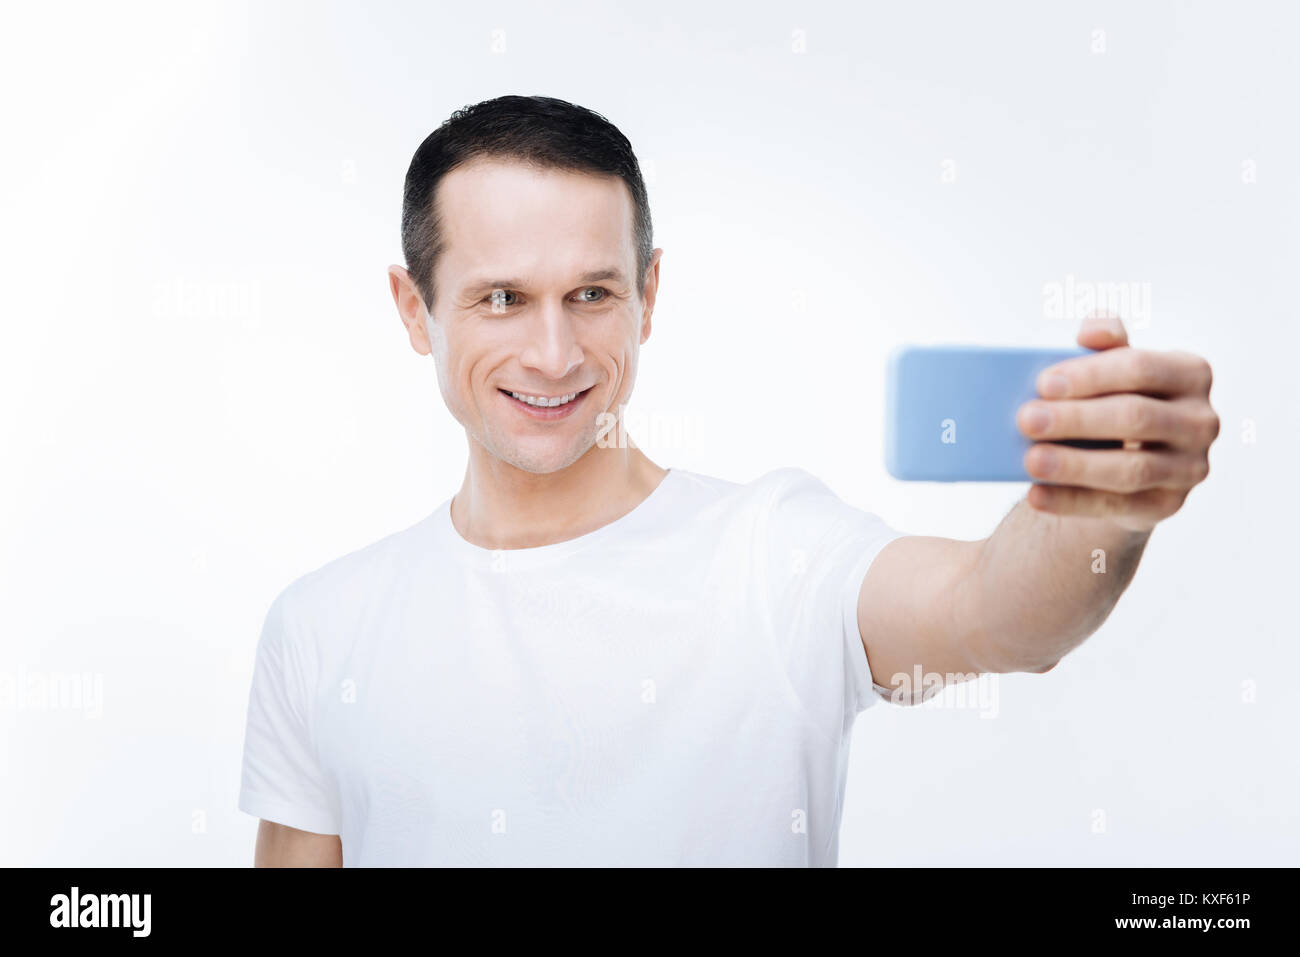 Happy delighted man taking selfie Stock Photo